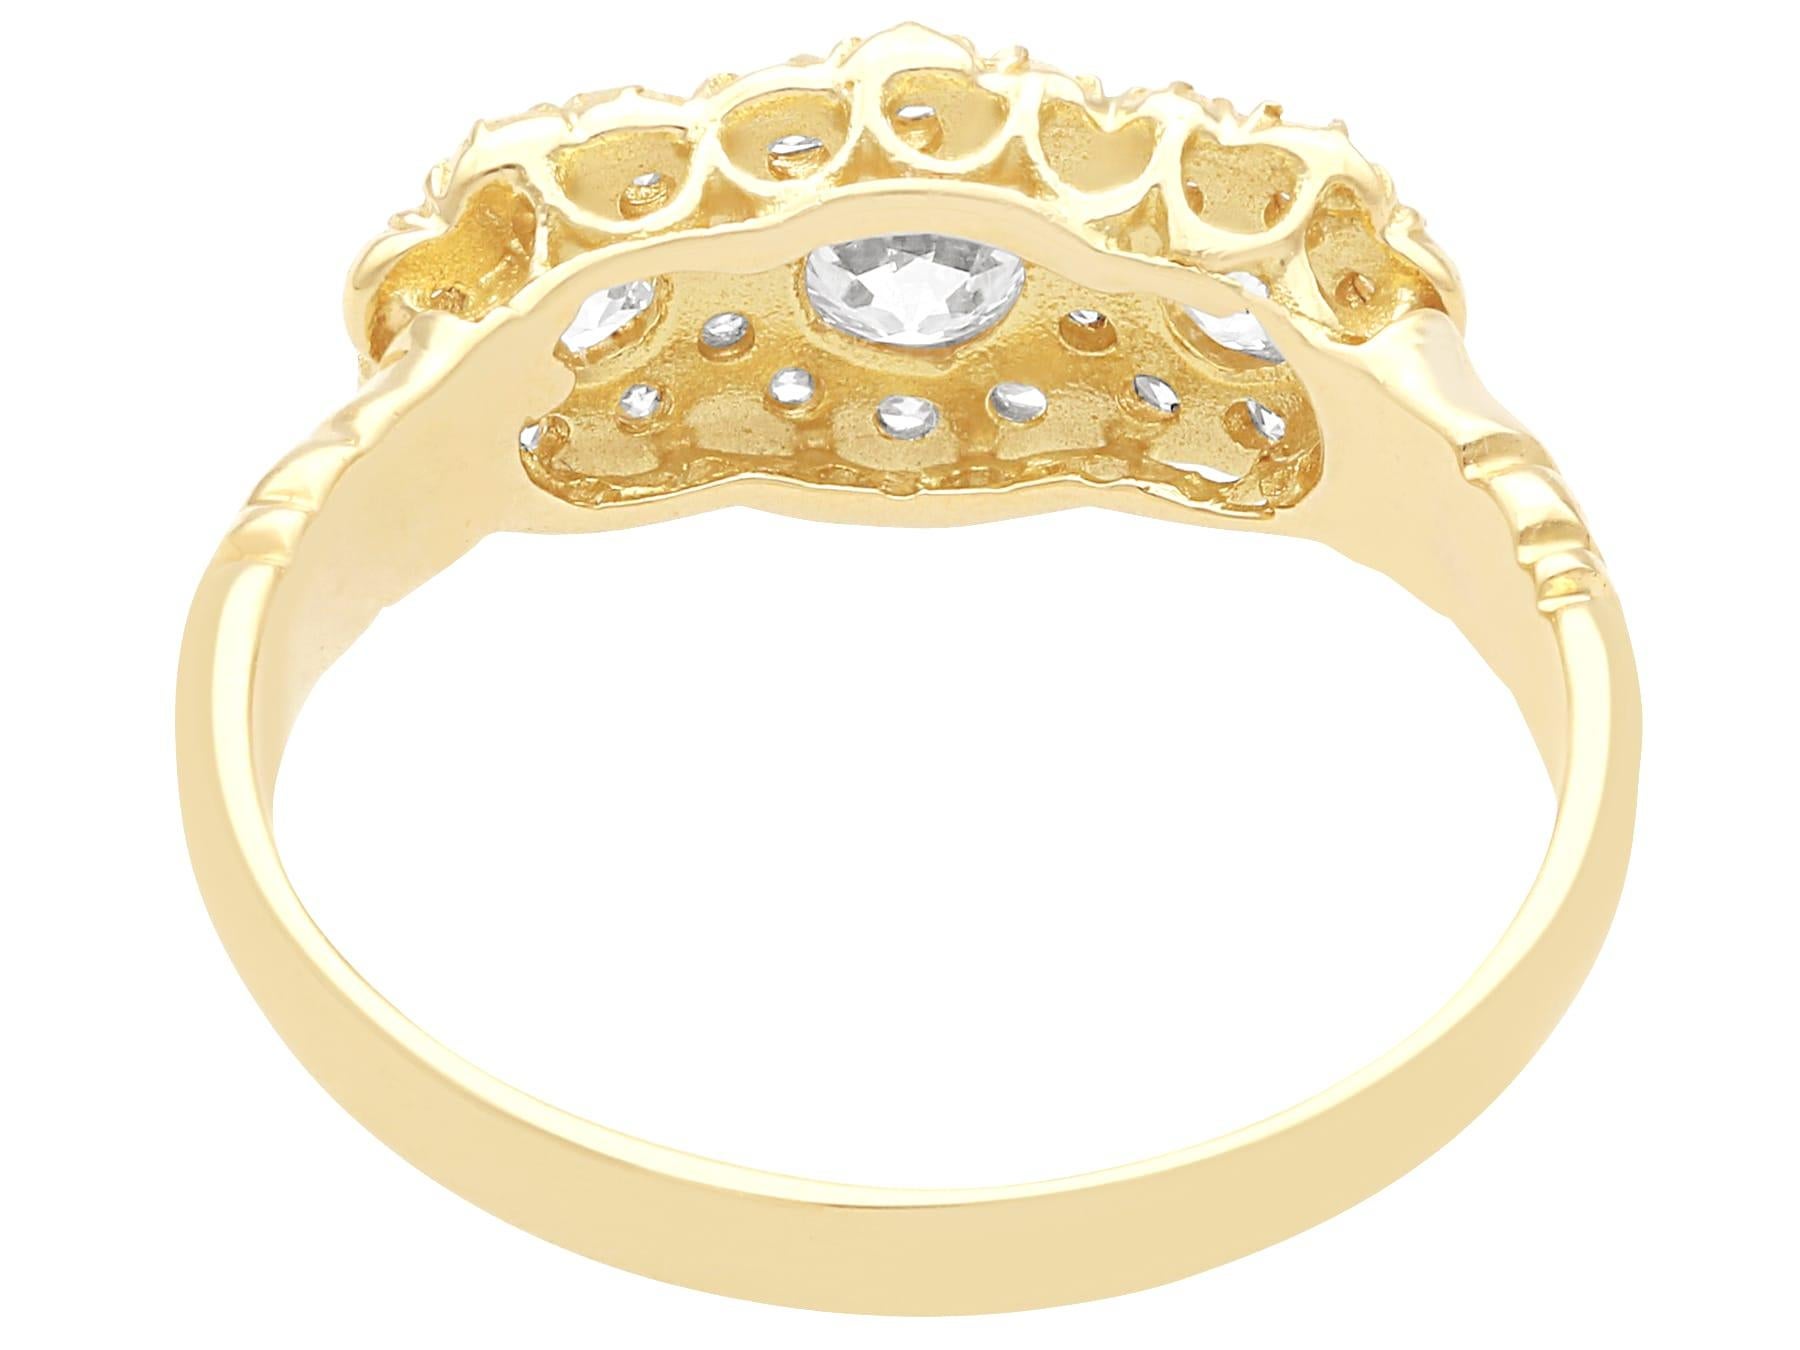 Old European Cut Antique 1.01 Carat Diamond and Yellow Gold Trilogy Cluster Ring, Circa 1910 For Sale